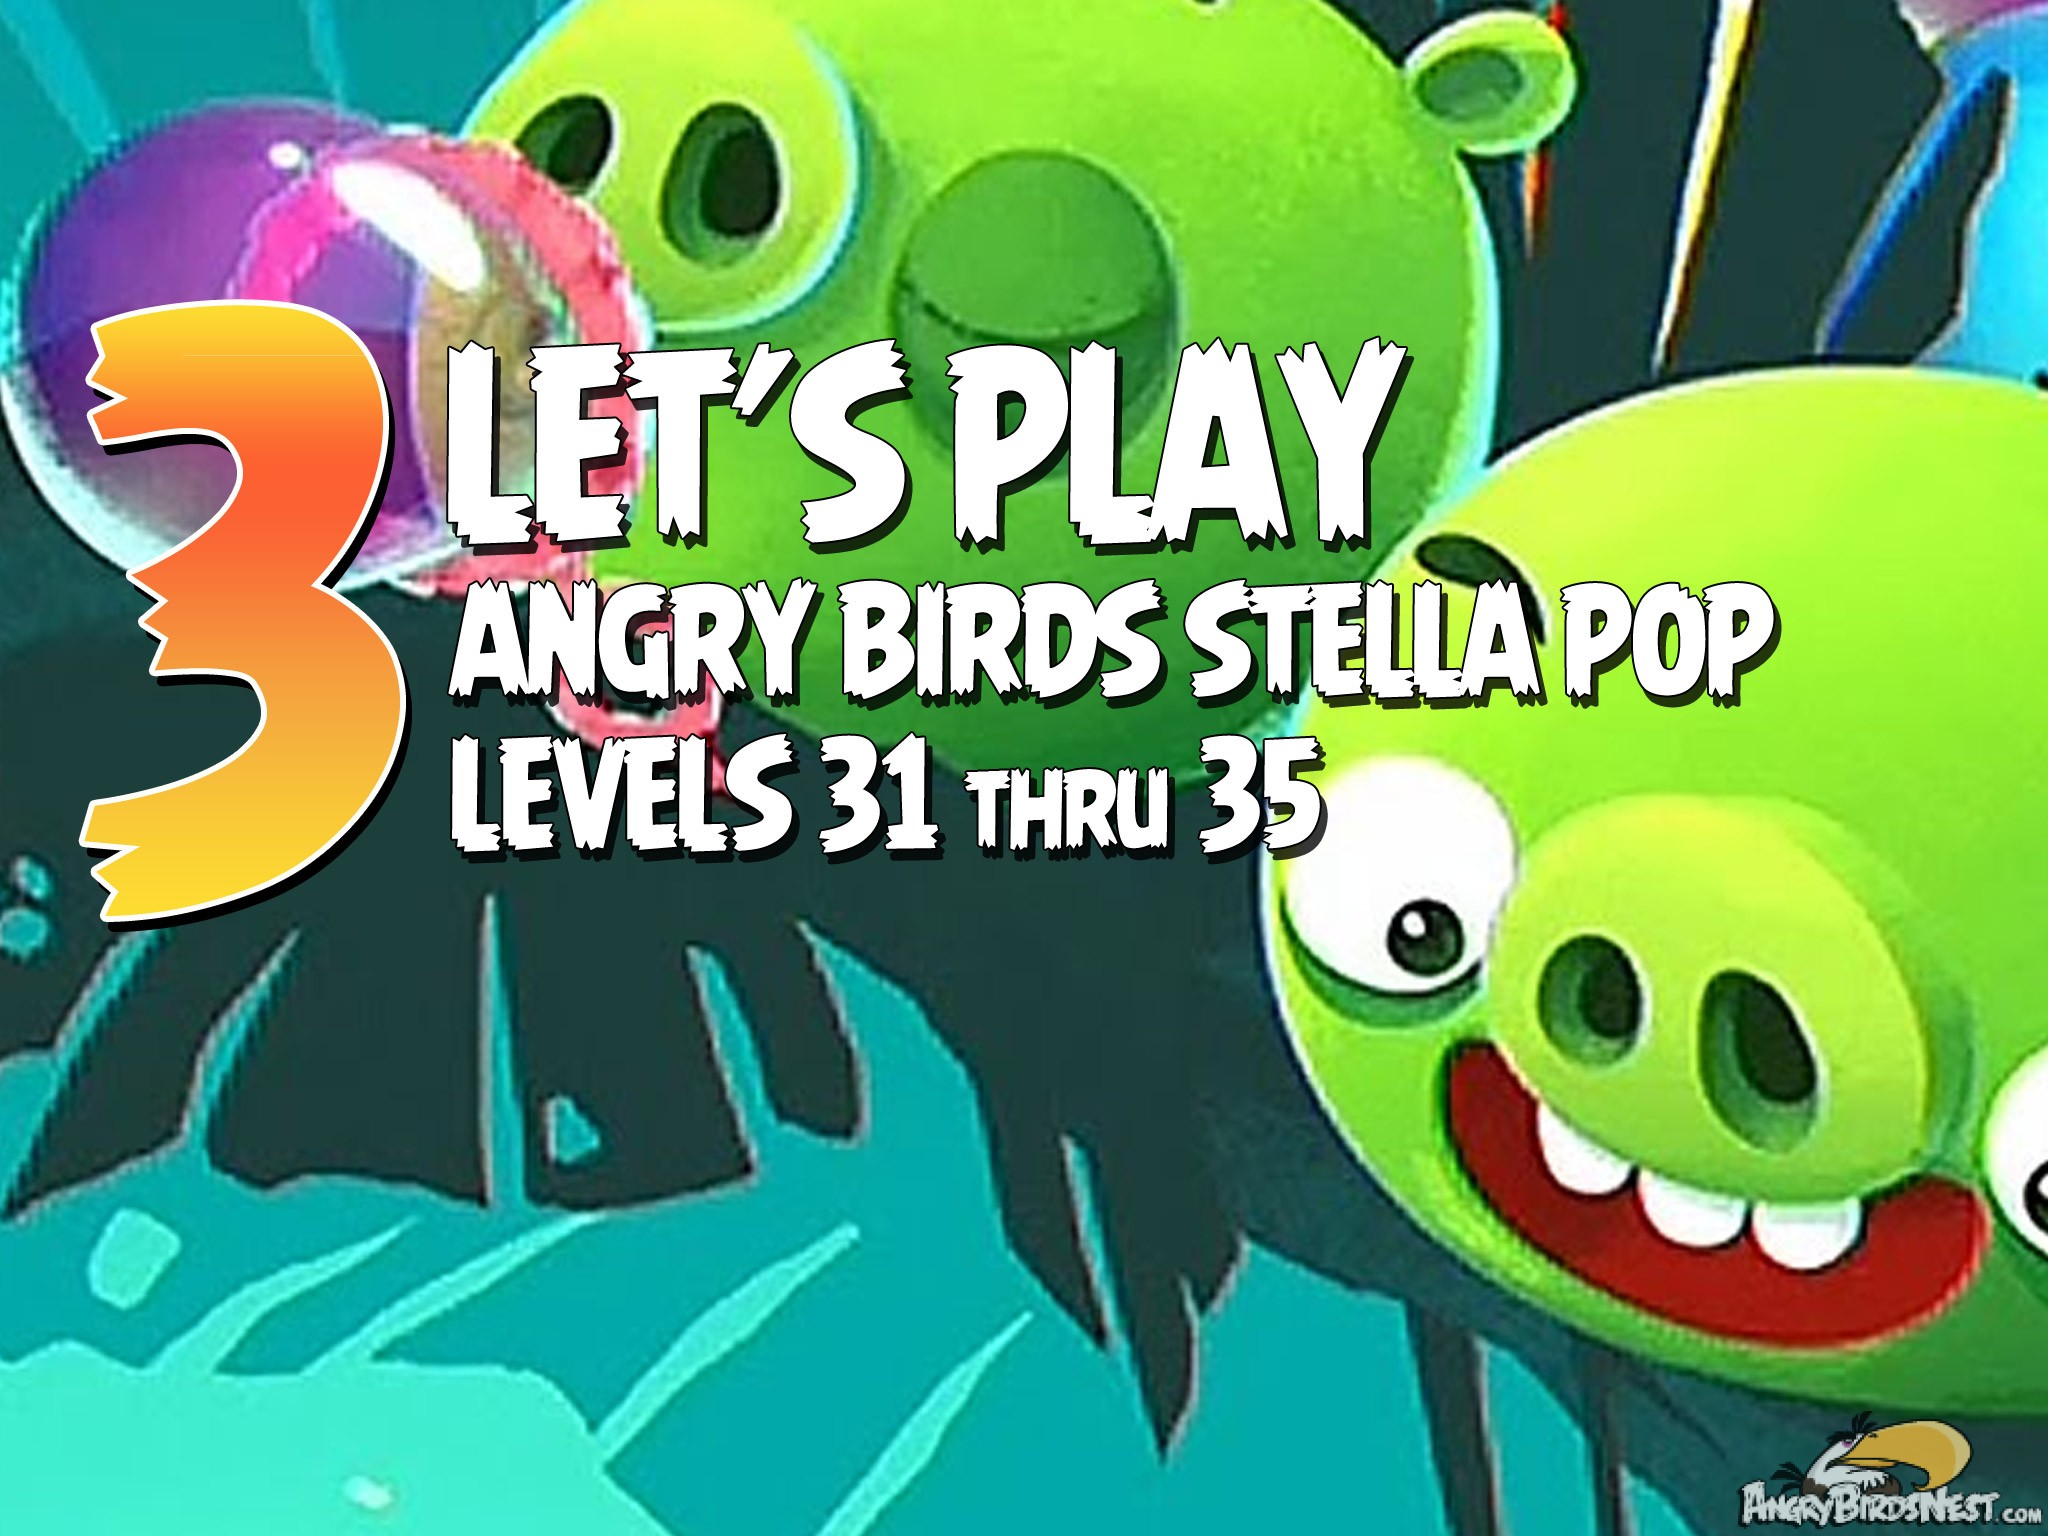 Angry Birds Stella Pop Featured Image Levels 31  thru 35